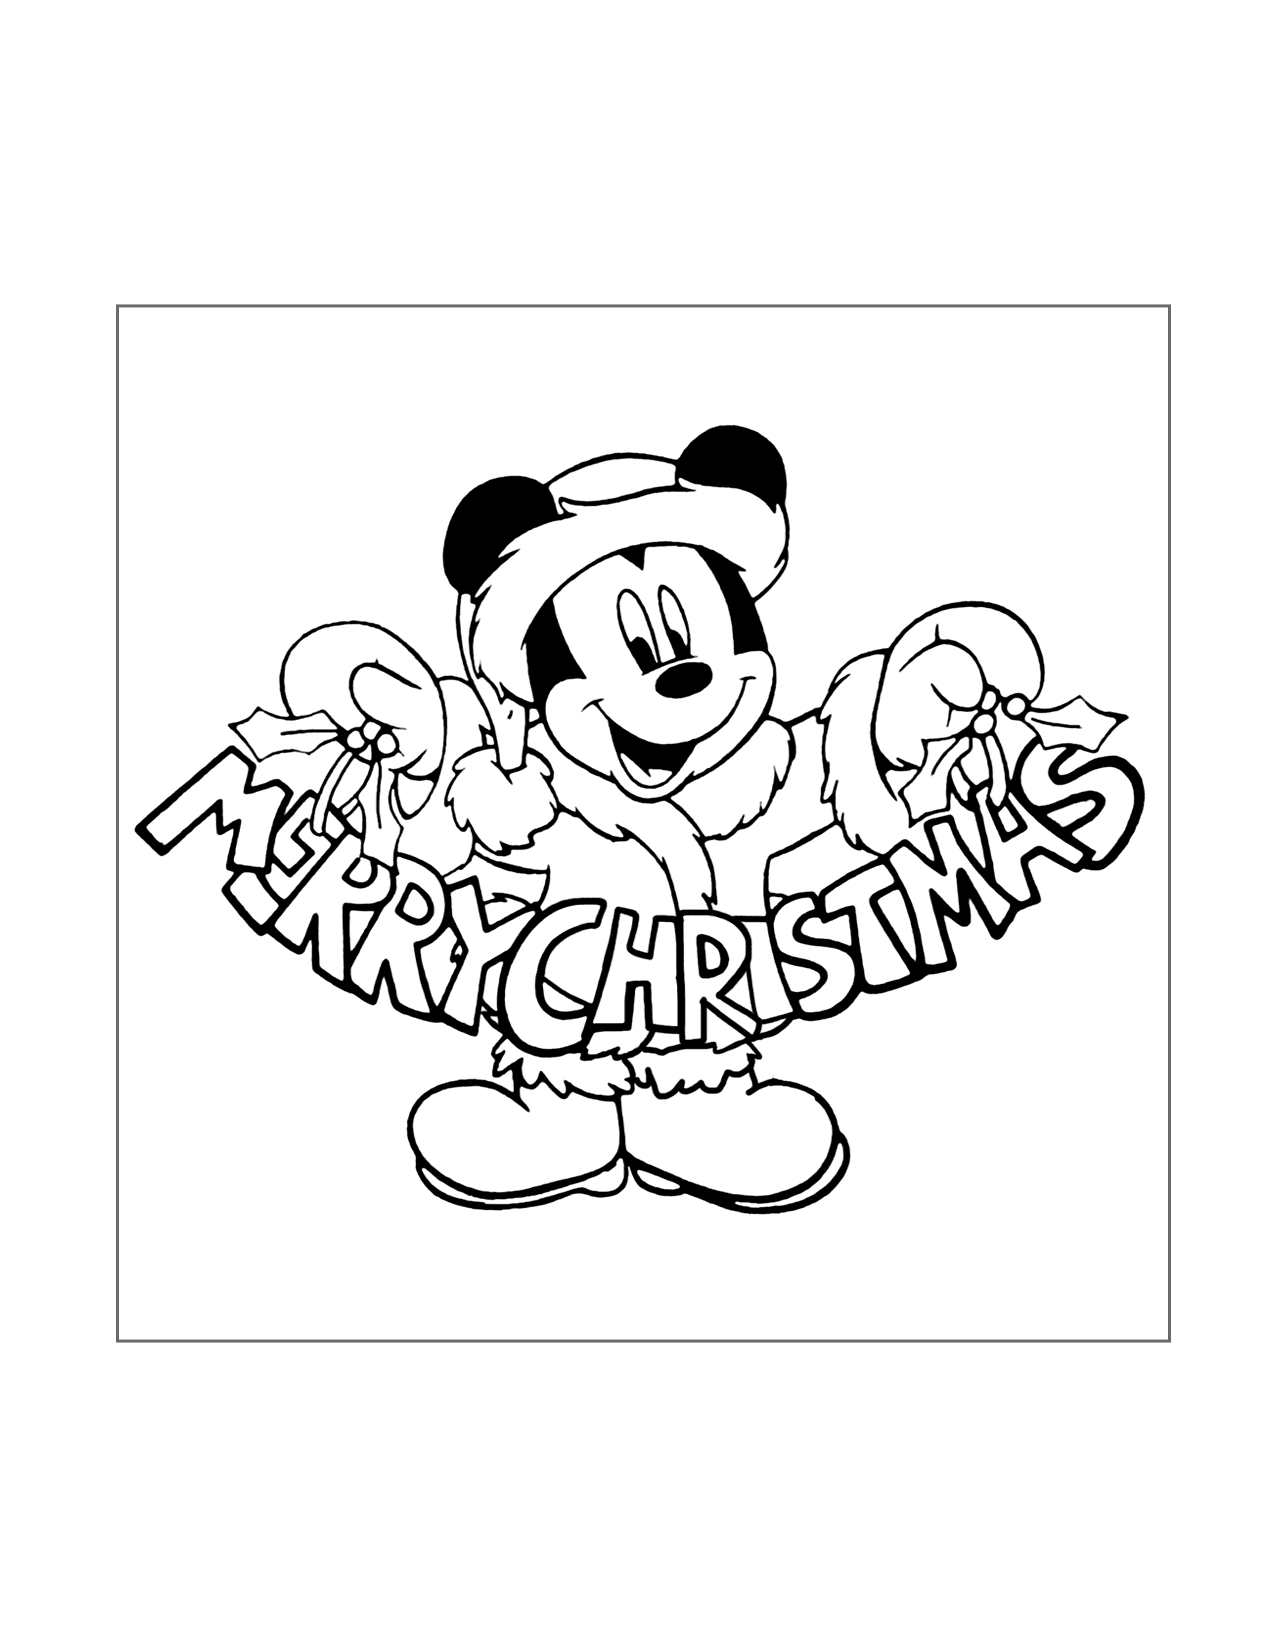 Merry Christmas Mickey Mouse Coloring Page